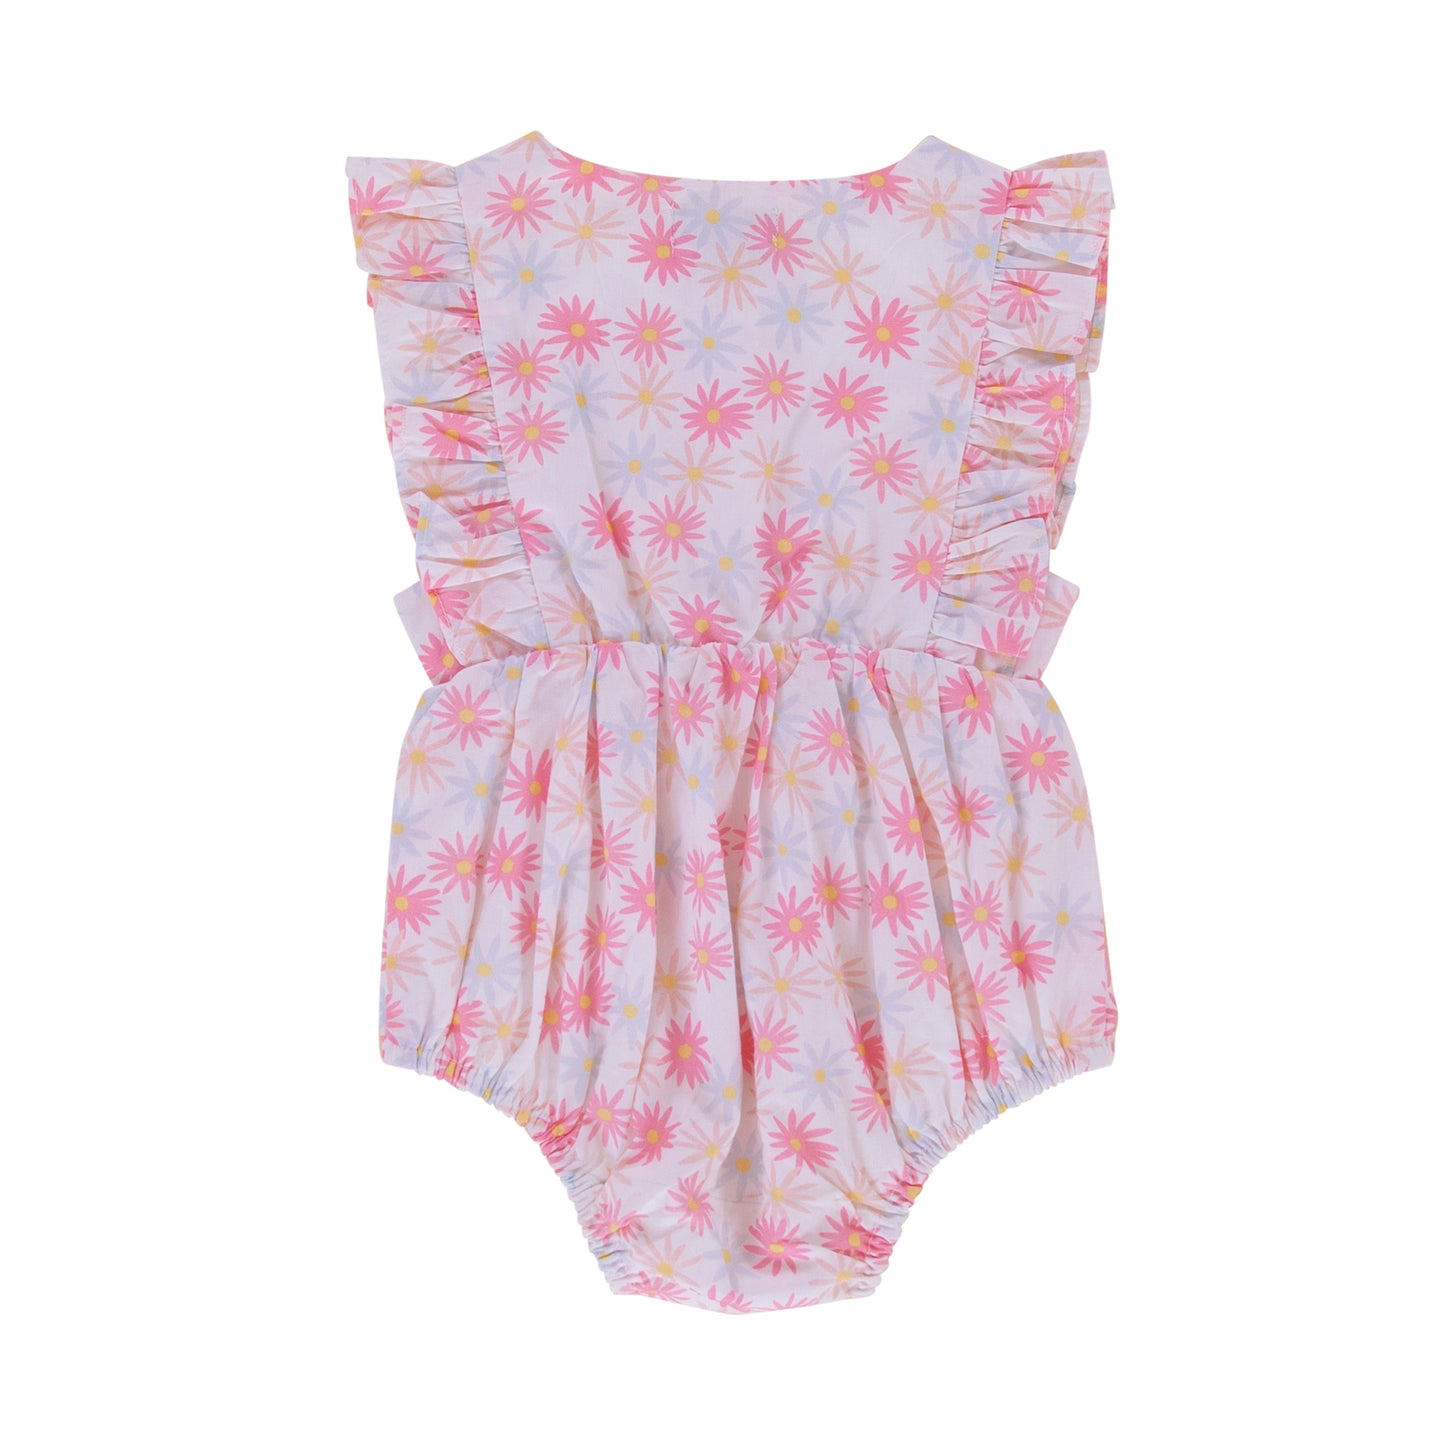 August Playsuit Betsy Peterson Daisy Print